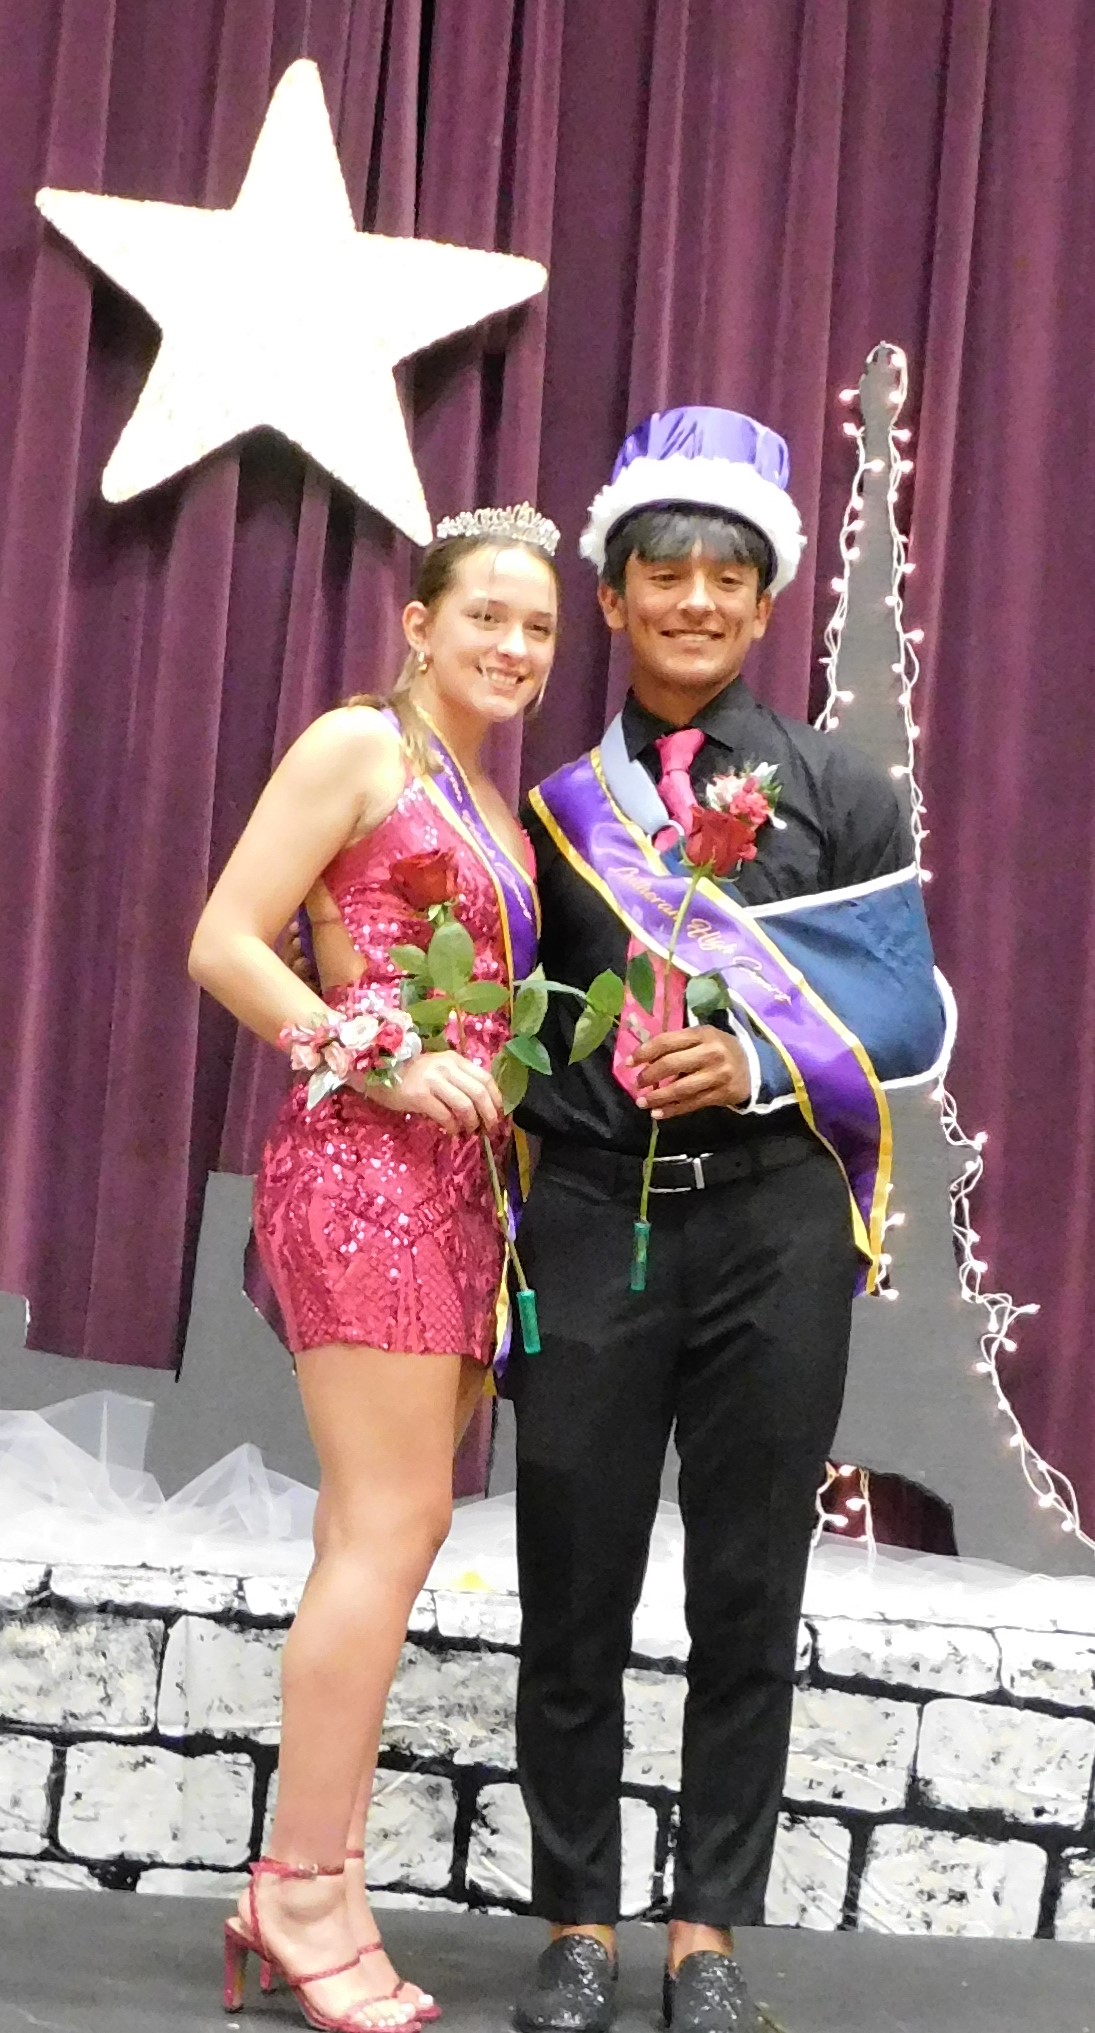 Re'Gine is Queen: VHHS Students Elect School's First Homecoming